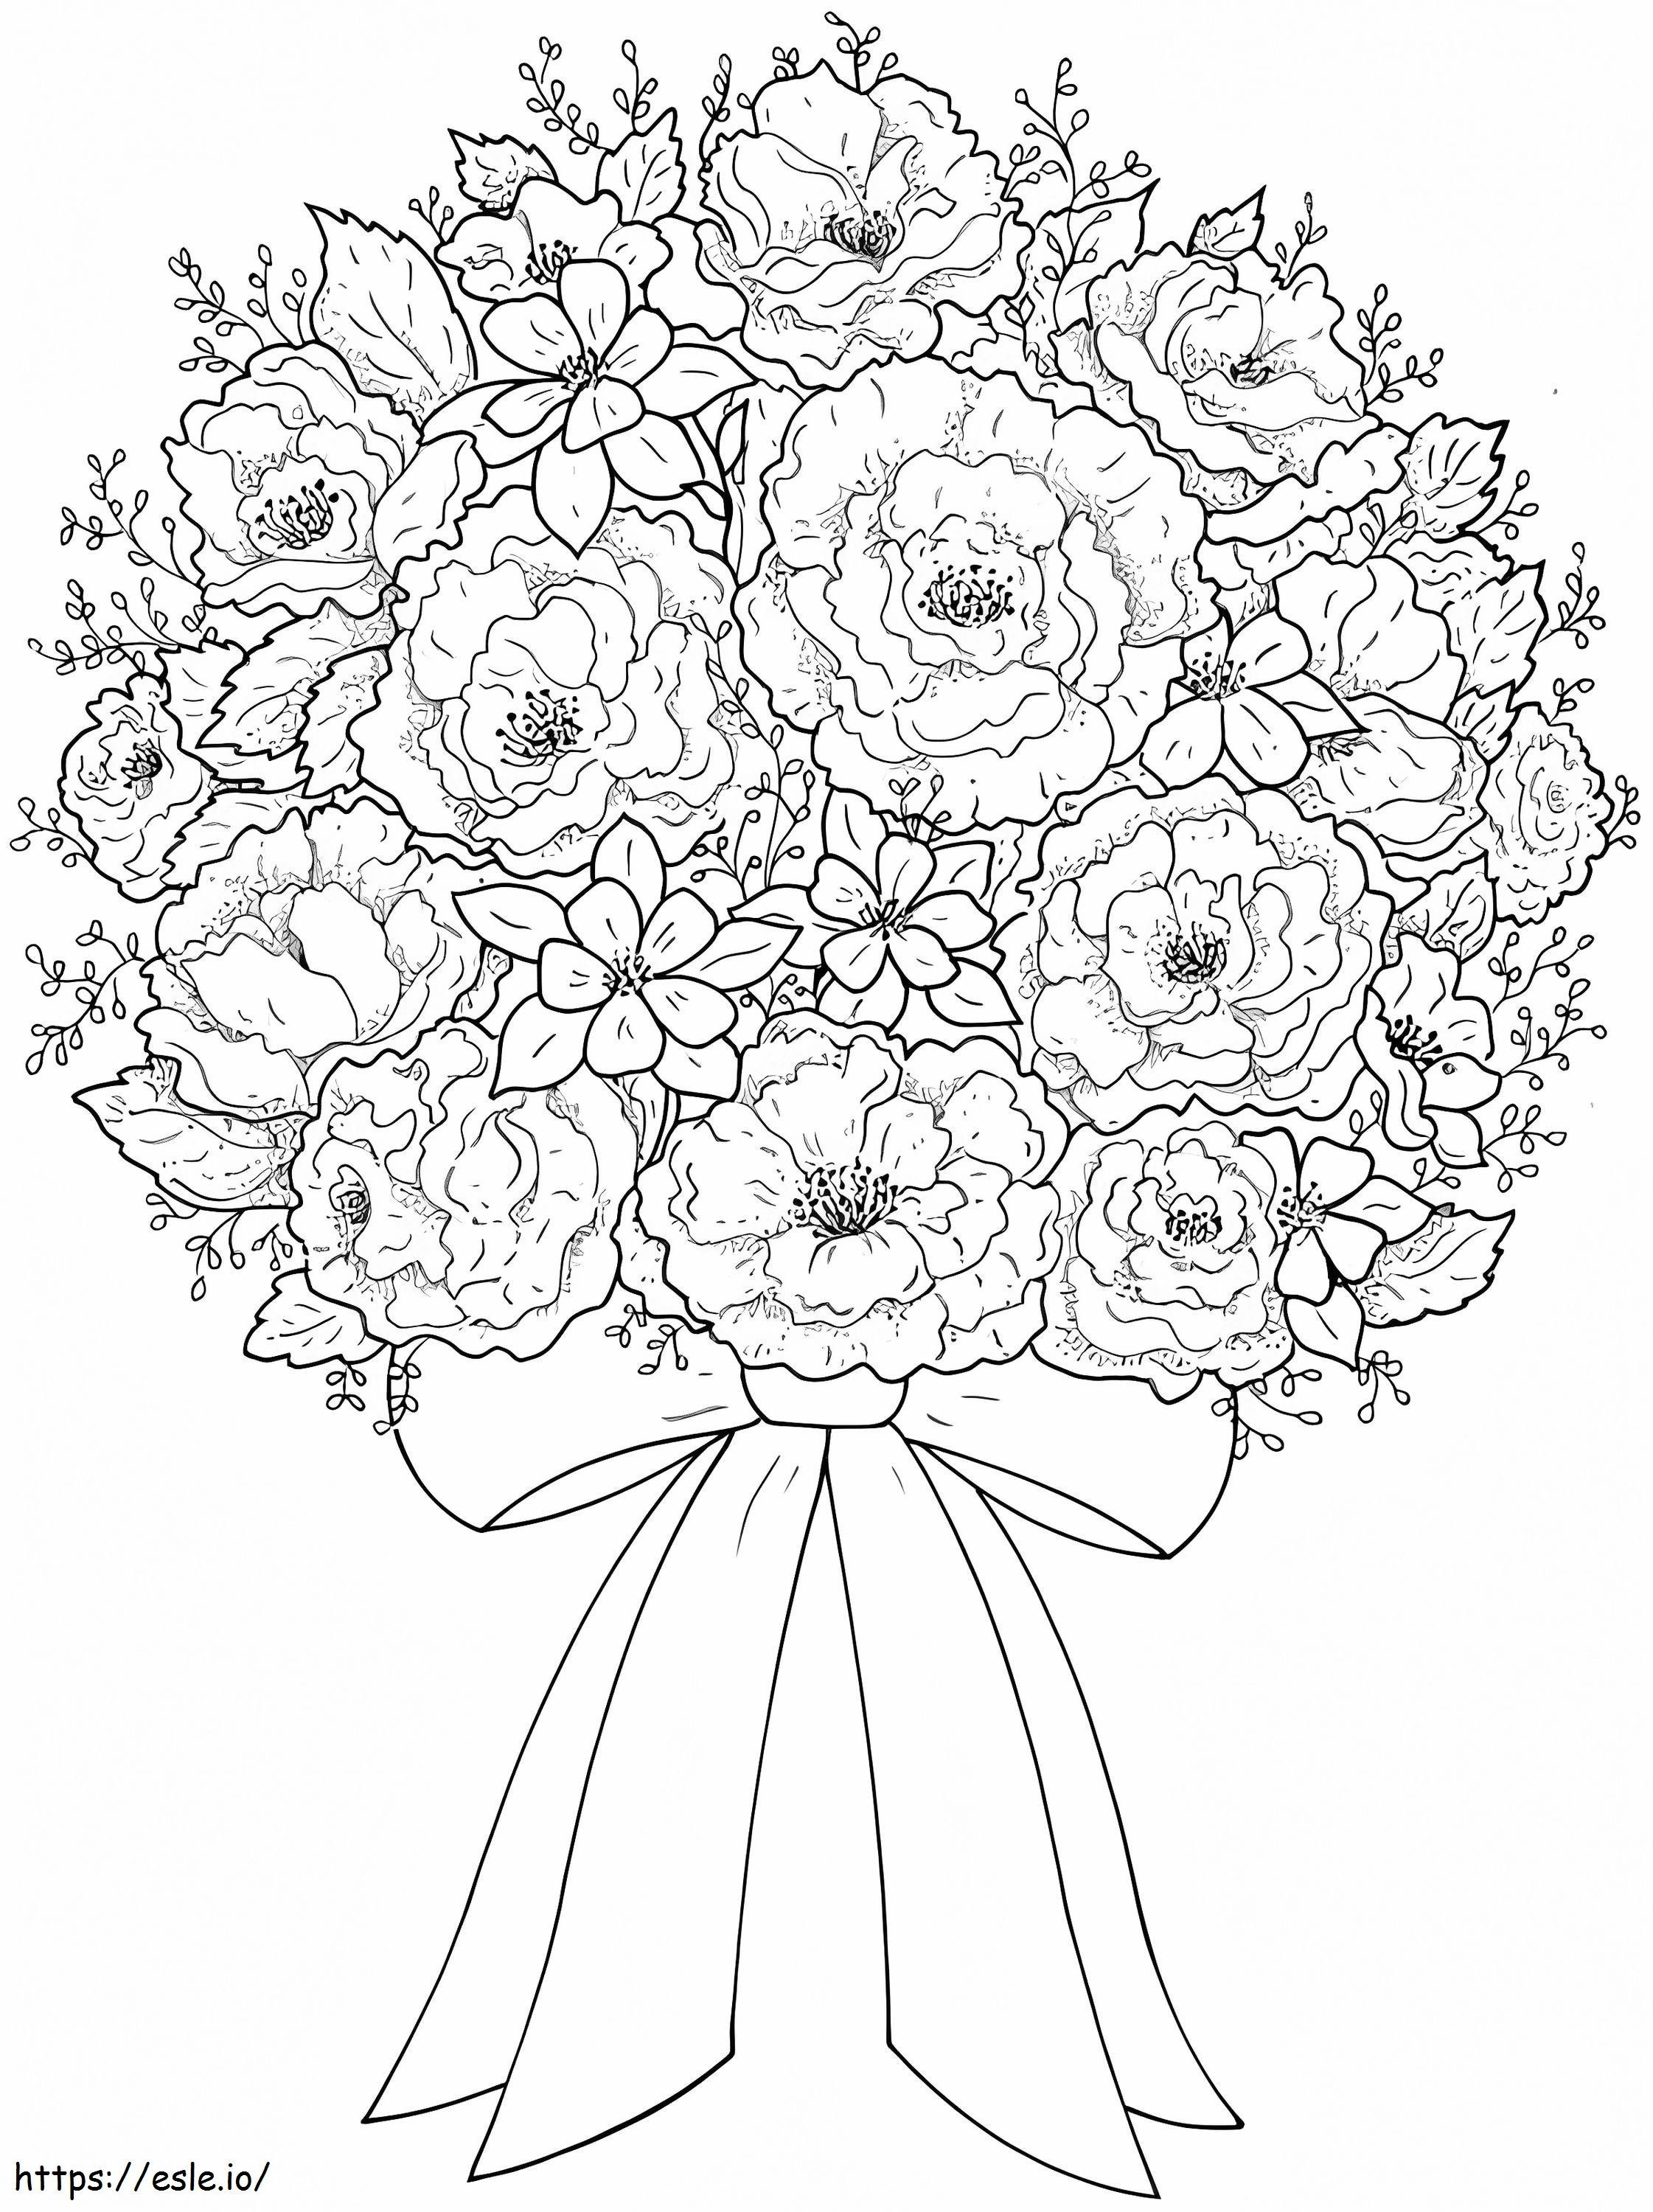 Normal Branch coloring page